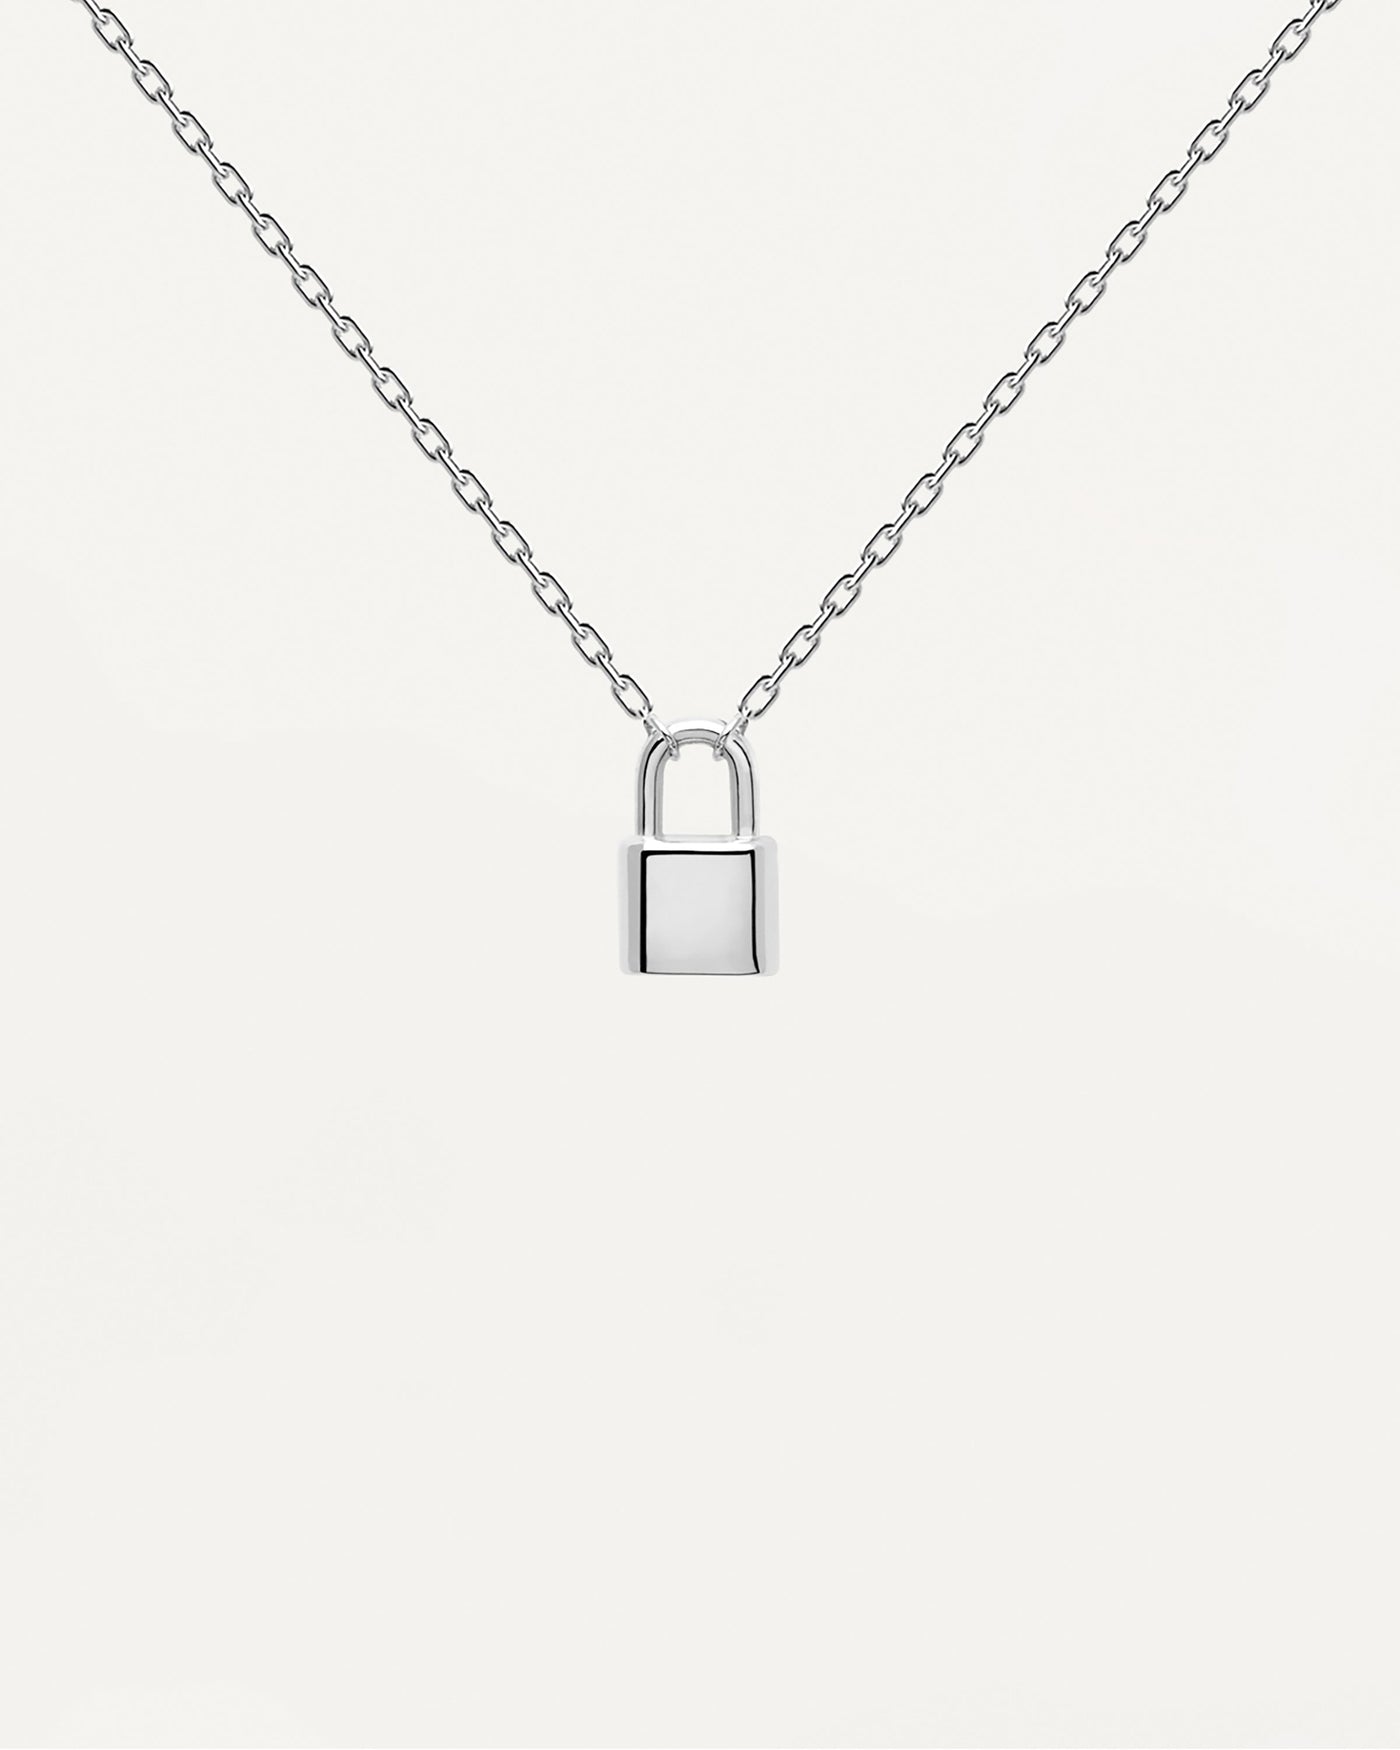 2023 Selection | Bond Silver Necklace. Sterling silver necklace with padlock pendant to personalize. Get the latest arrival from PDPAOLA. Place your order safely and get this Best Seller. Free Shipping.